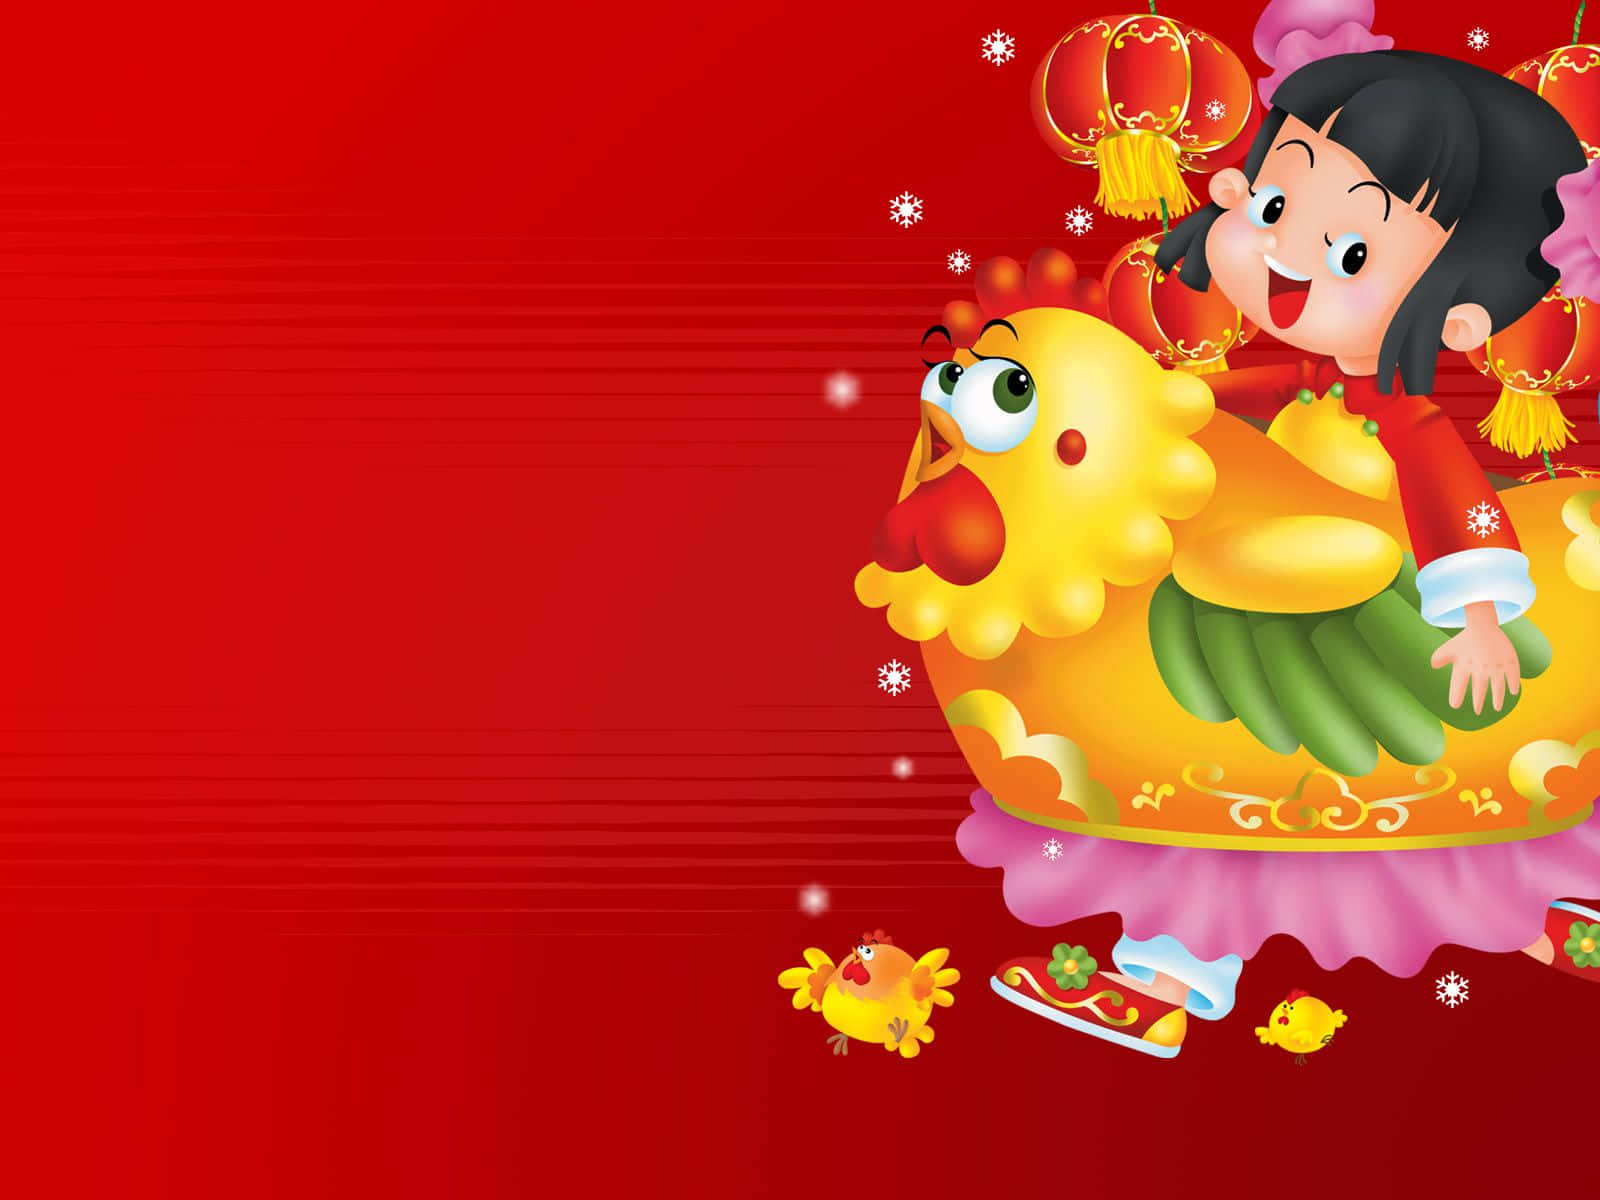 Celebrate the Chinese New Year with family, friends and festivities!